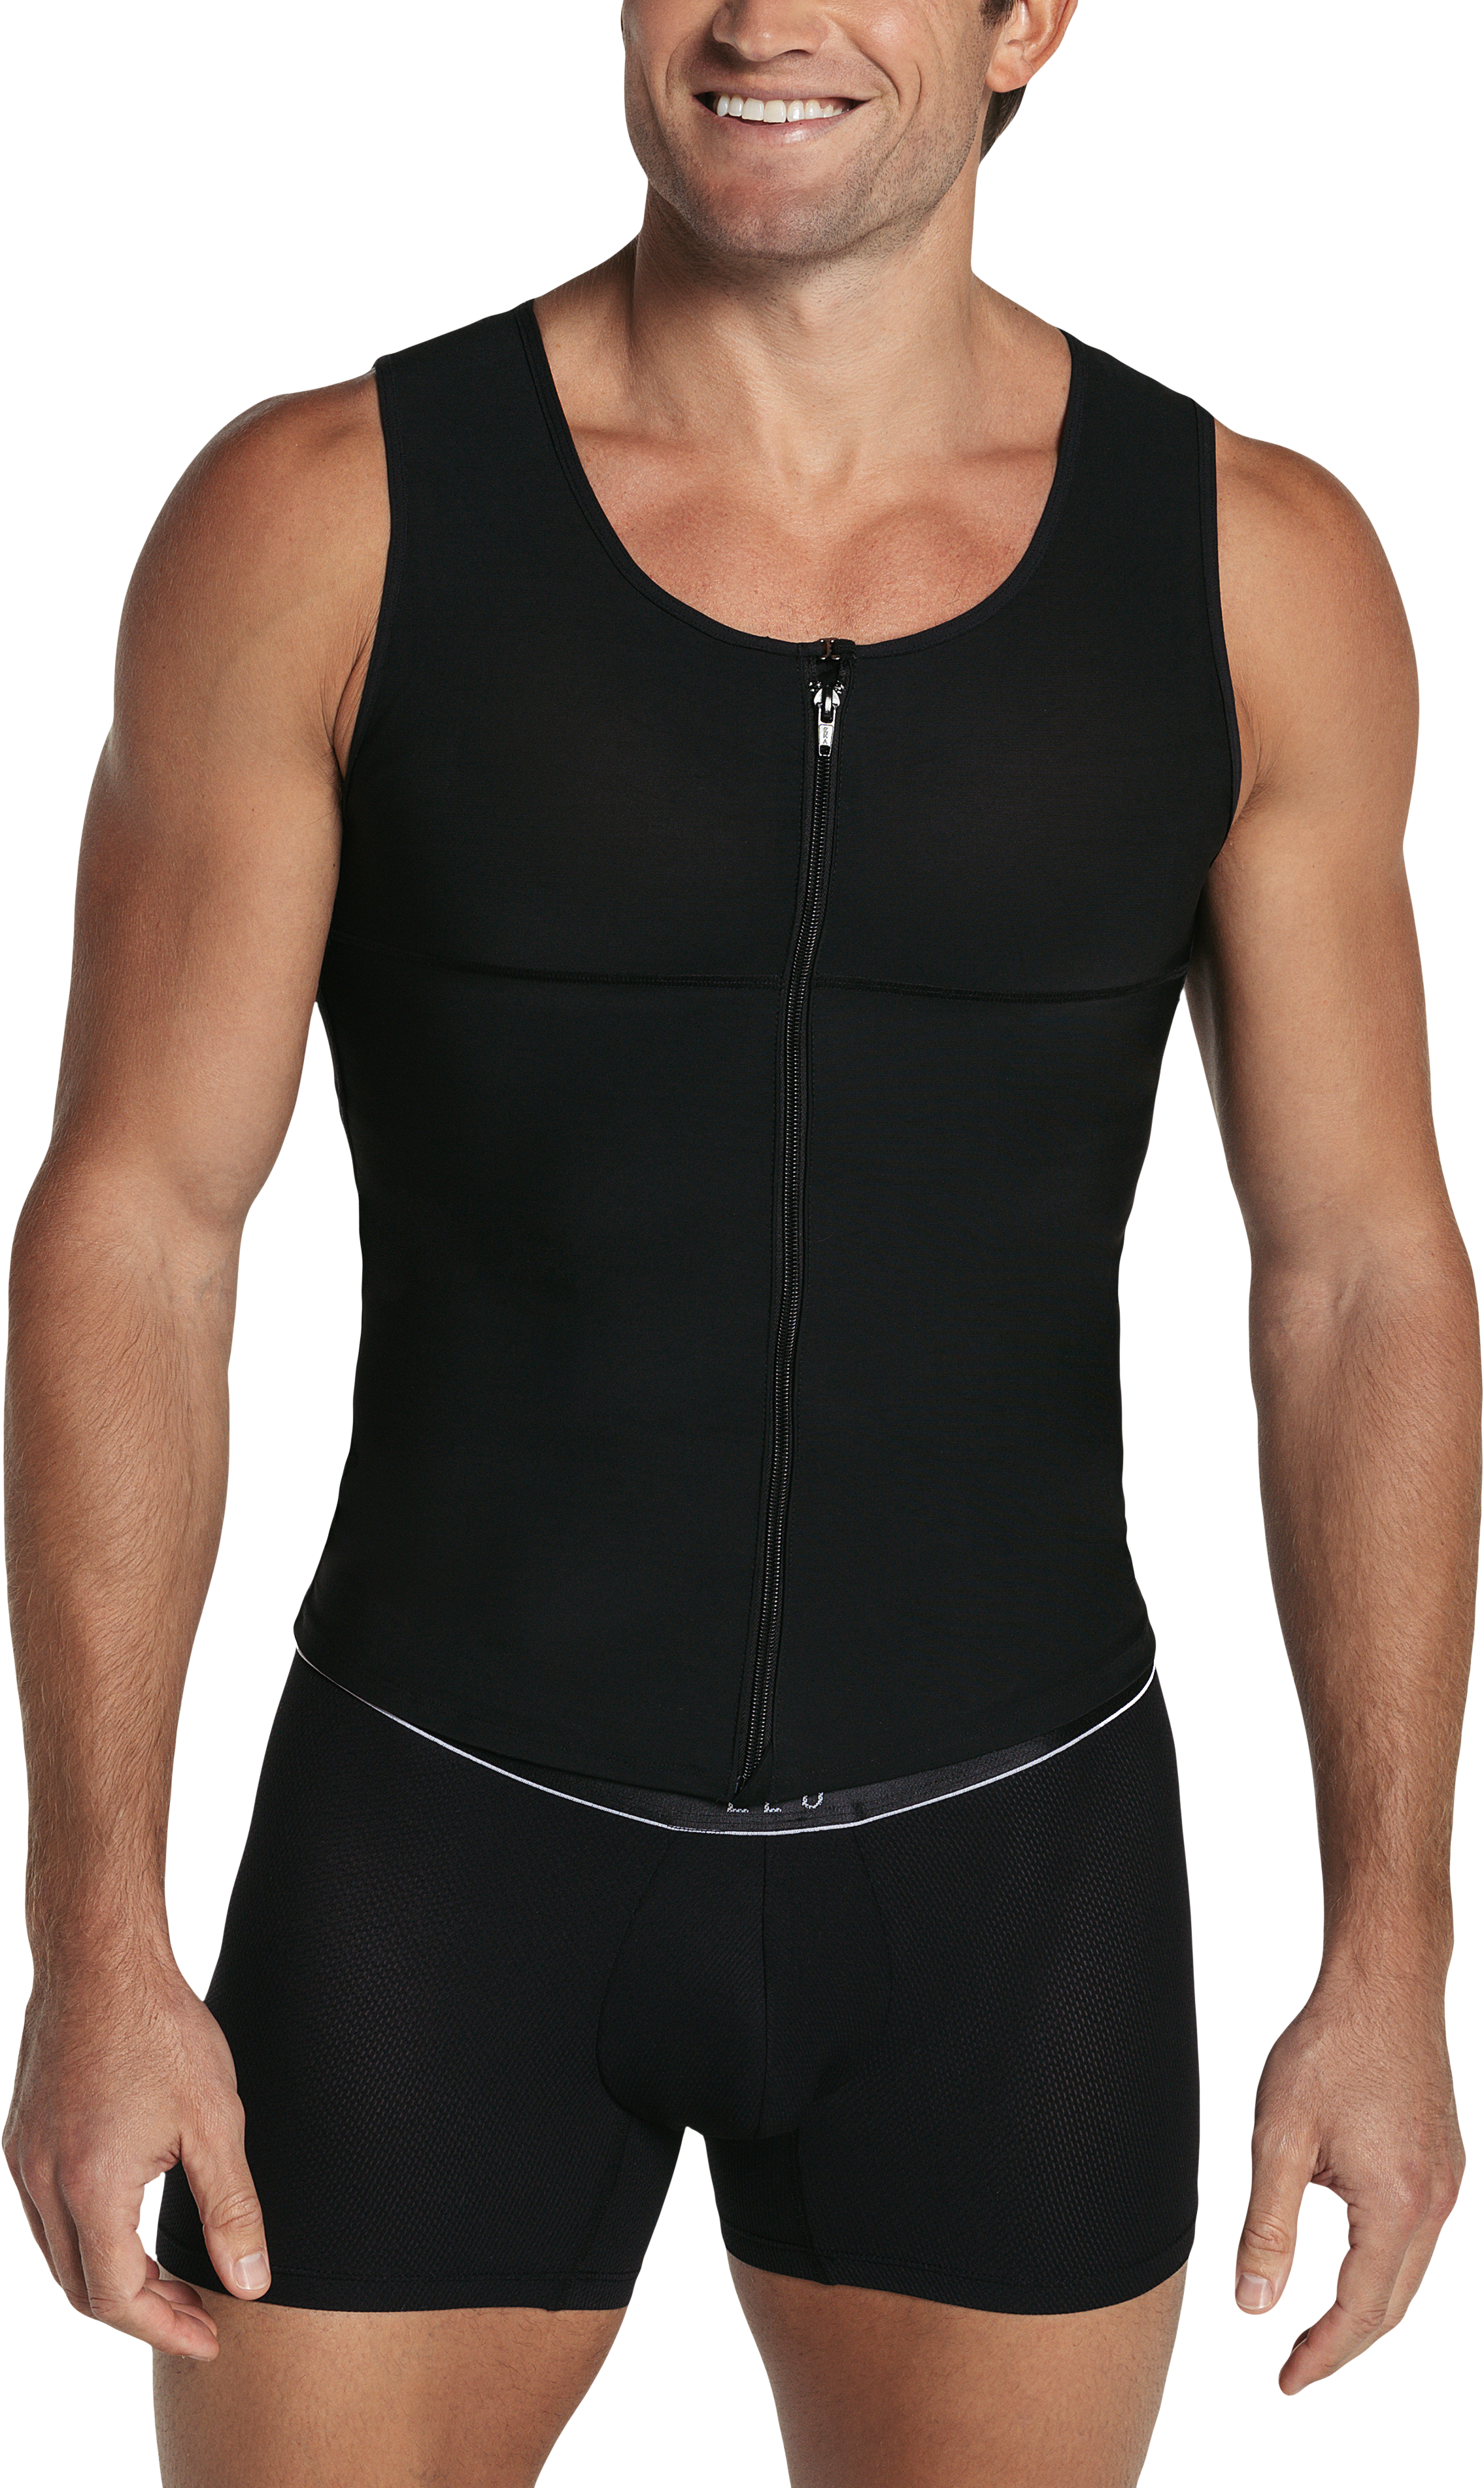 Leo By Leonisa Body Shaper Vest with Back Support, All Sale